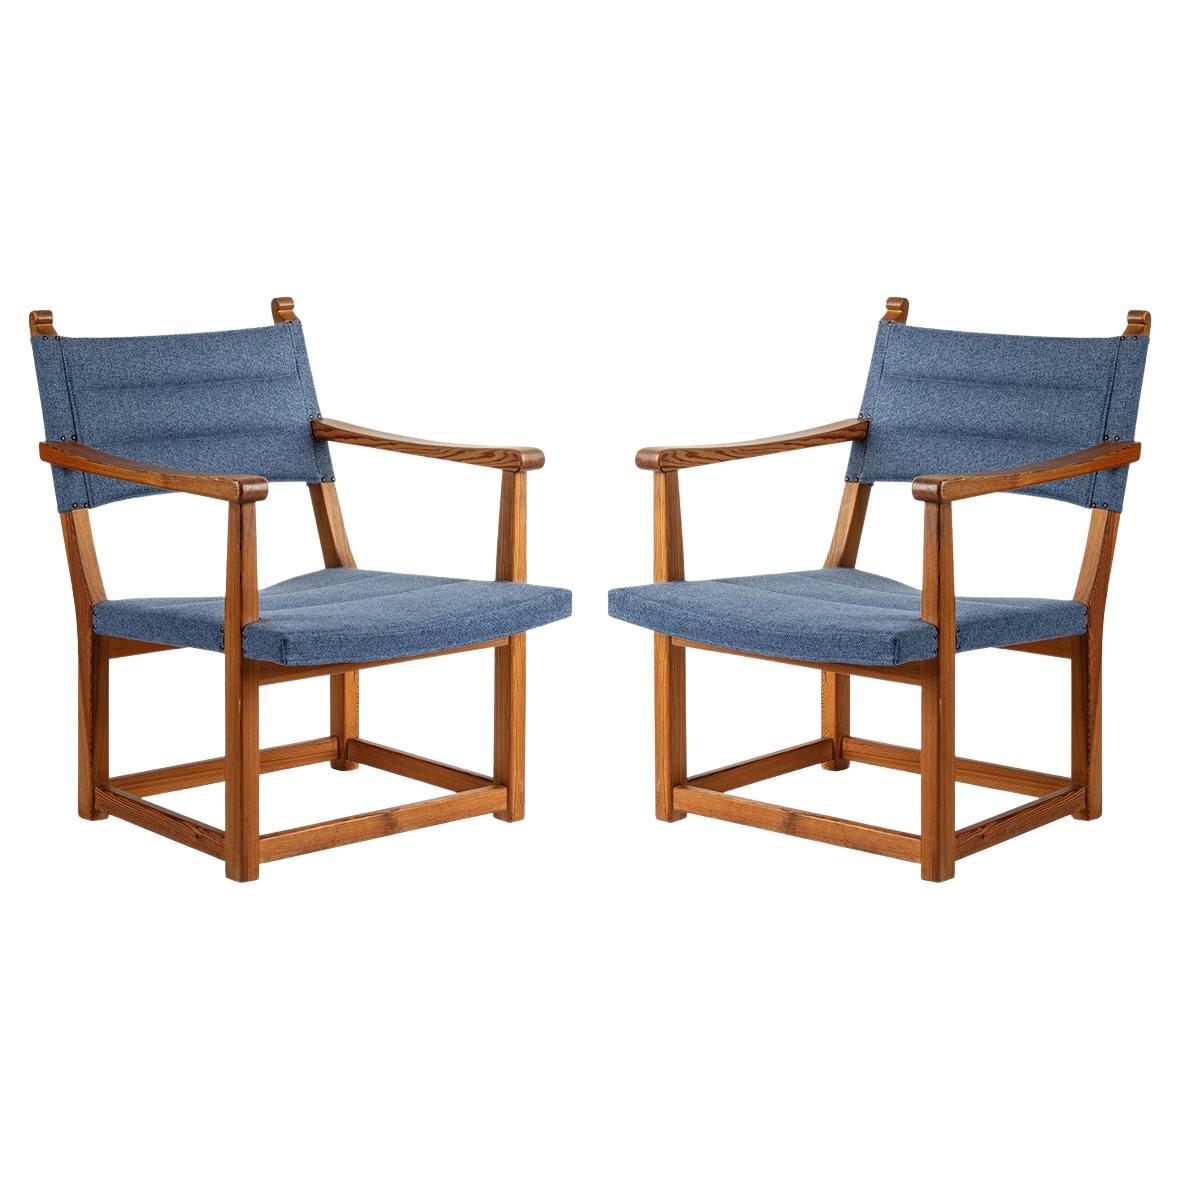 Carl Malmsten Pair of “Hängsits” Armchairs in Solid Pine, 1947